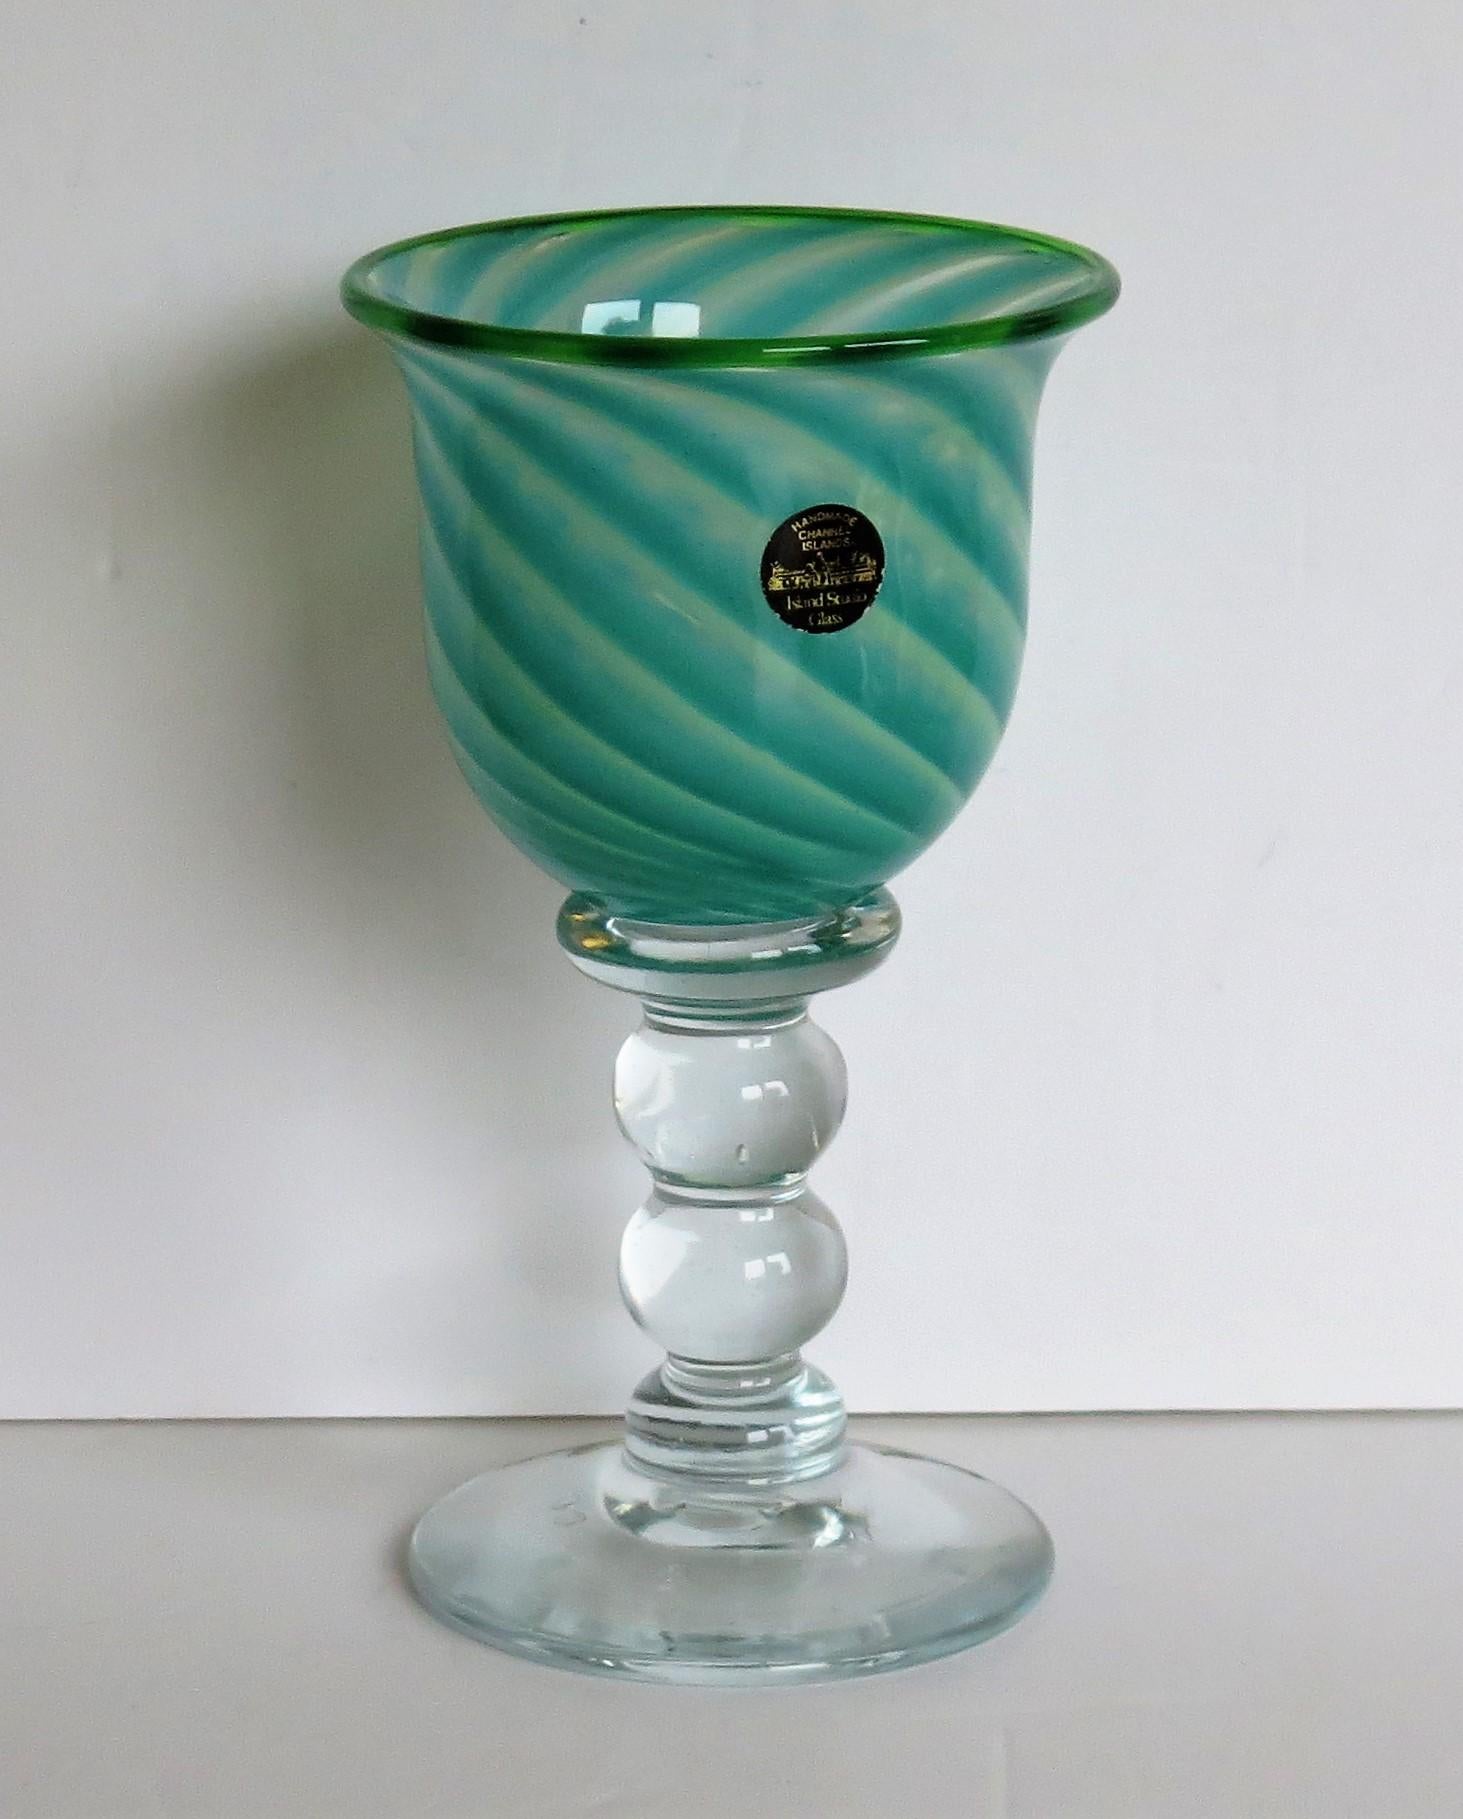 This is a very good large hand blown glass goblet, made by Island Studio Glass of Guersey, Channel islands, dating to the late 20th century, circa 1985.

The glass goblet is beautifully handmade. The ogee shaped bowl is a lovely green / blue swirl